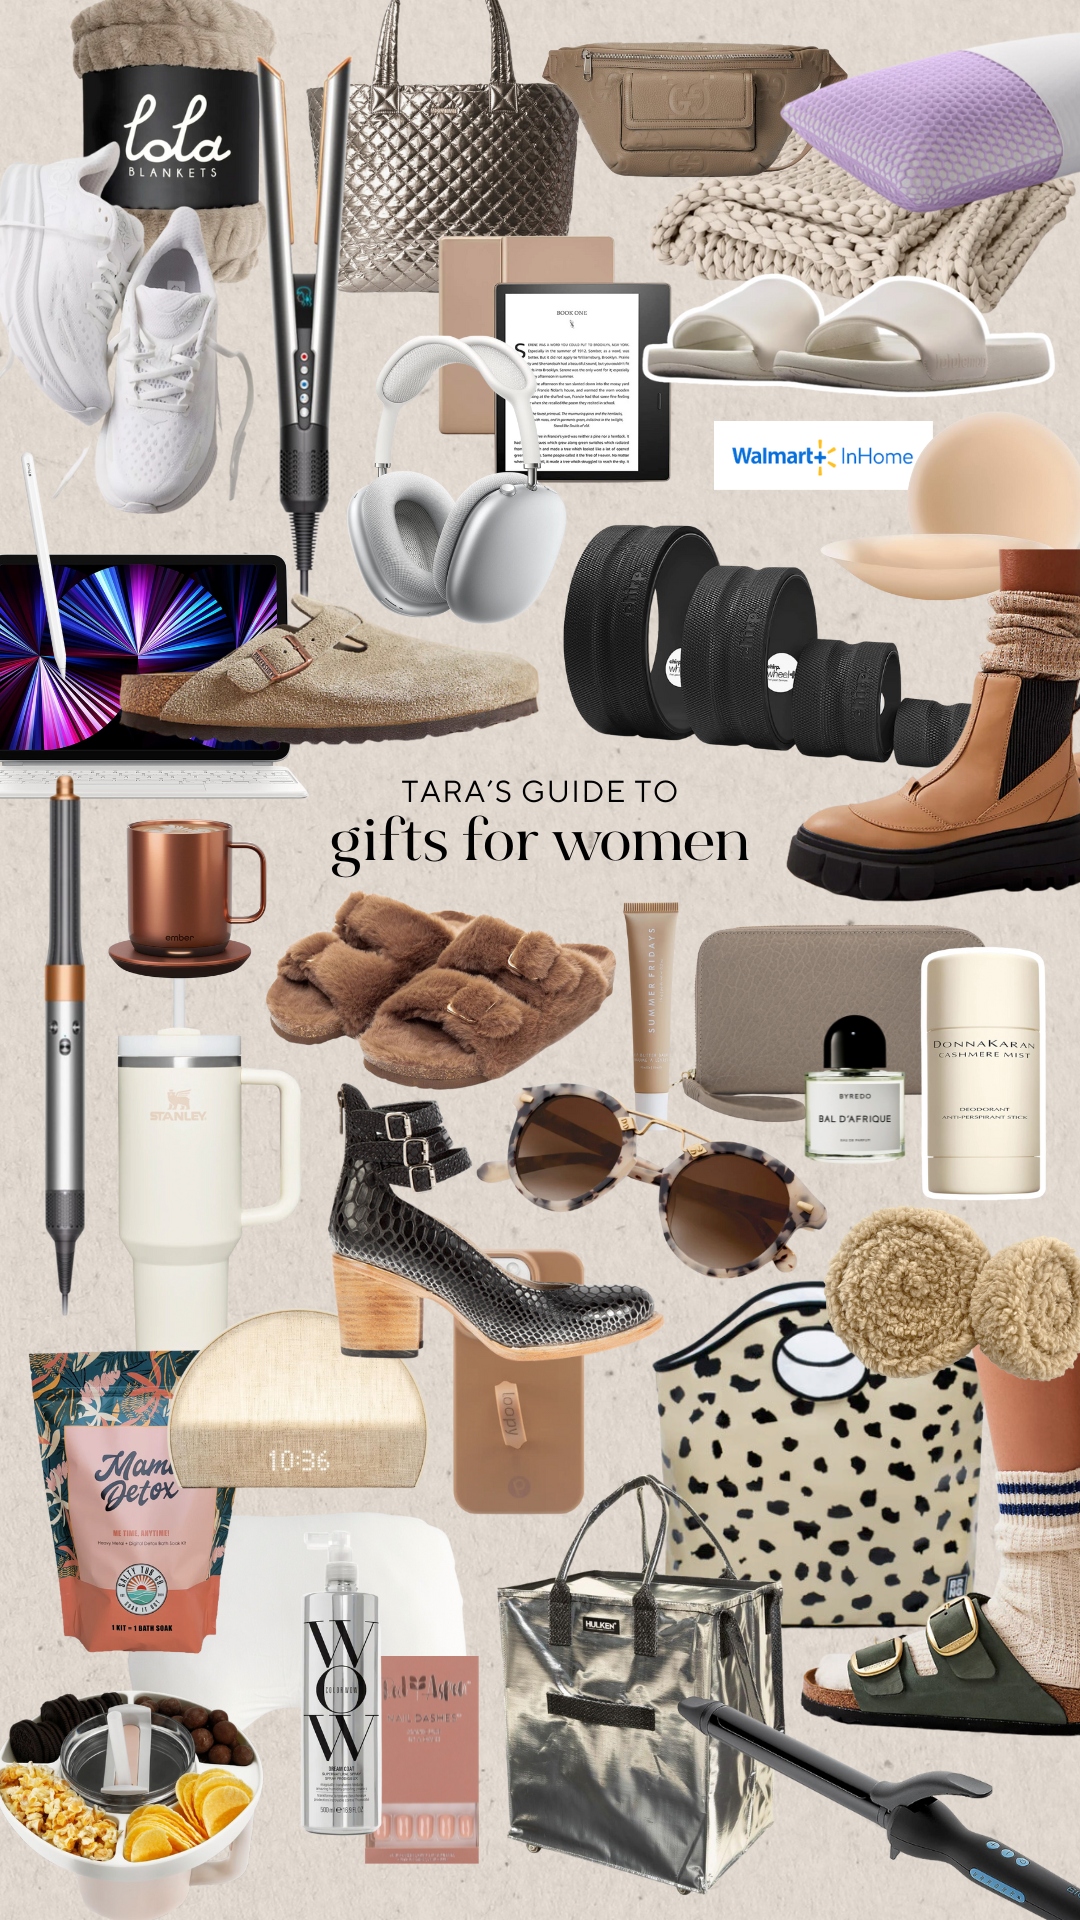 Holiday Gift Guide for the Traveler - 2022 – Tara Thueson